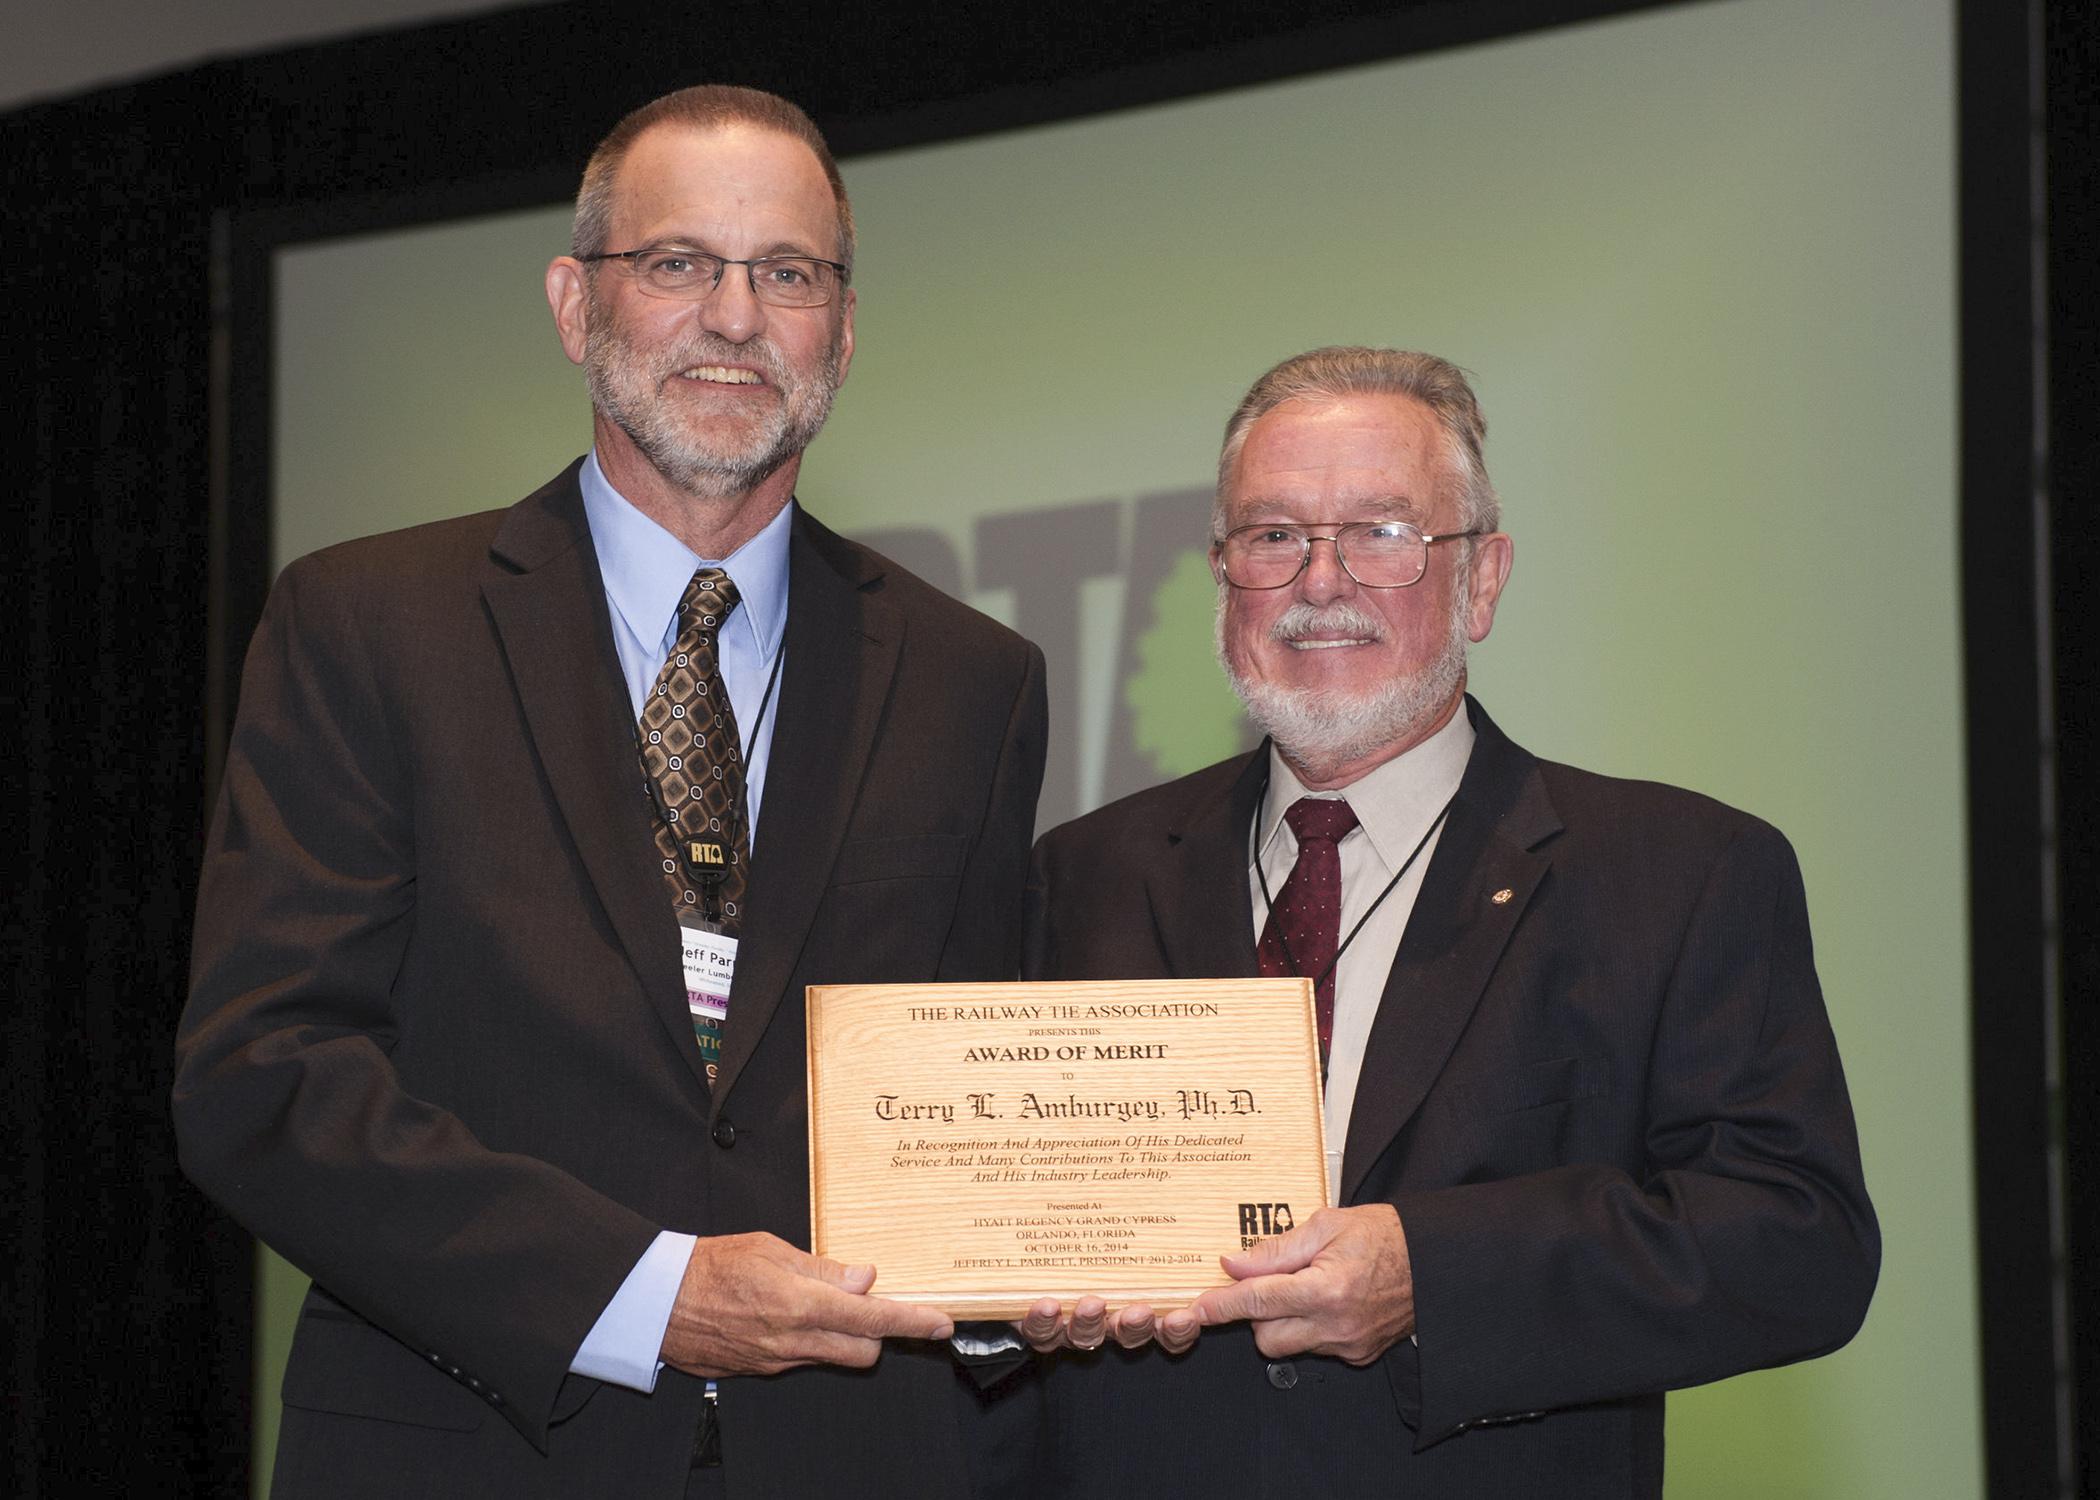 Jeff Parrett, currently of Wheeler Lumber and past president of the Railway Tie Association, left, presents Terry Amburgey, Mississippi State University professor emeritus and Giles Distinguished Professor, with the association's lifetime merit award. (Photo by Gary Coleman/Coleman Photography)